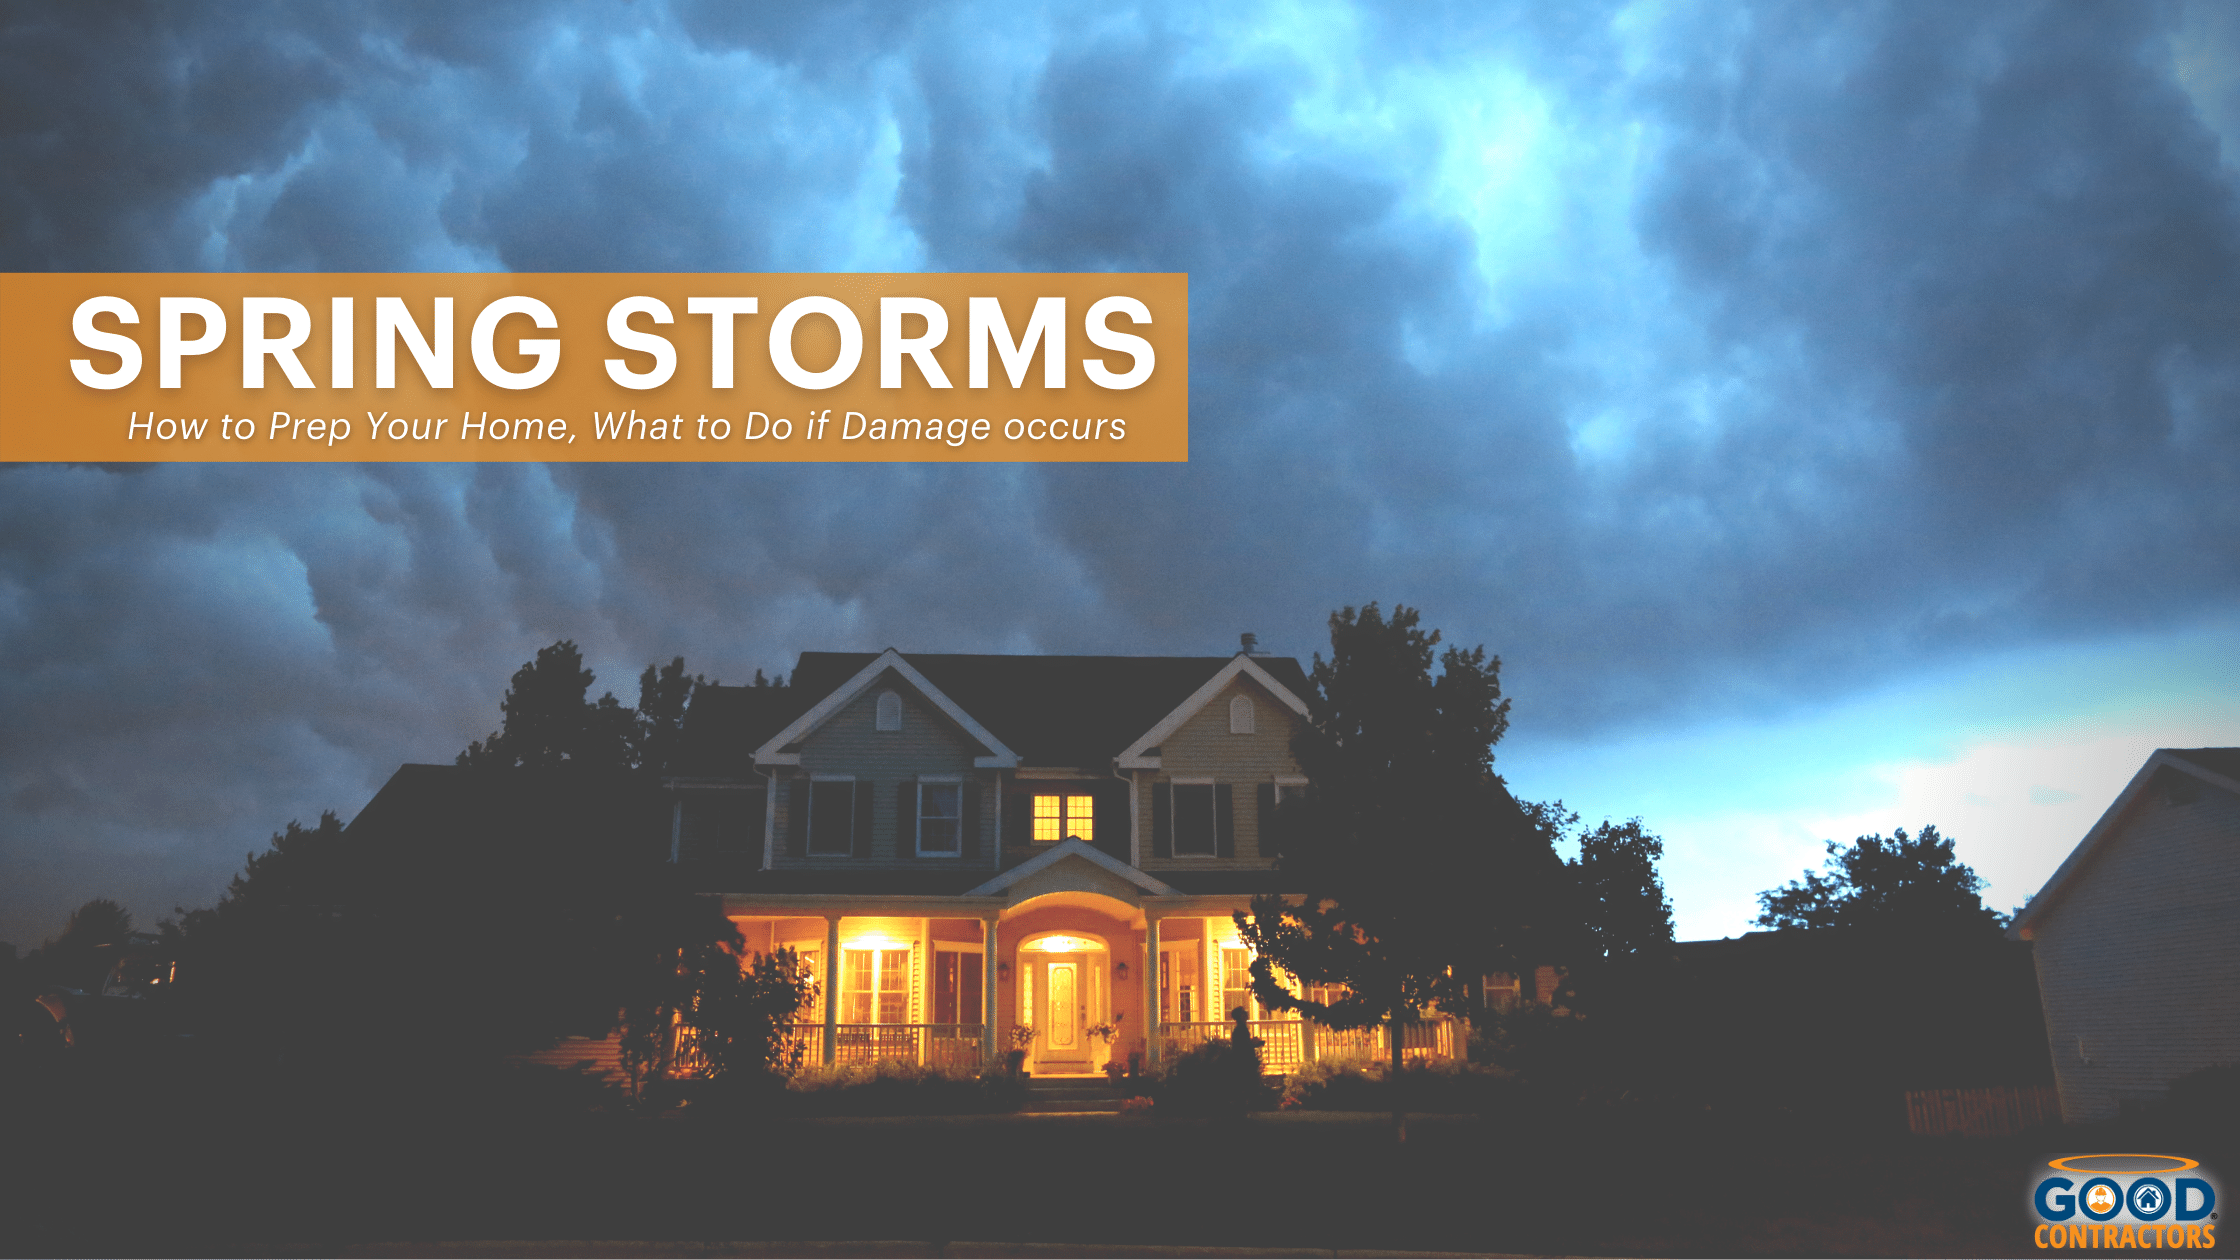 How to Prepare for Spring Storms